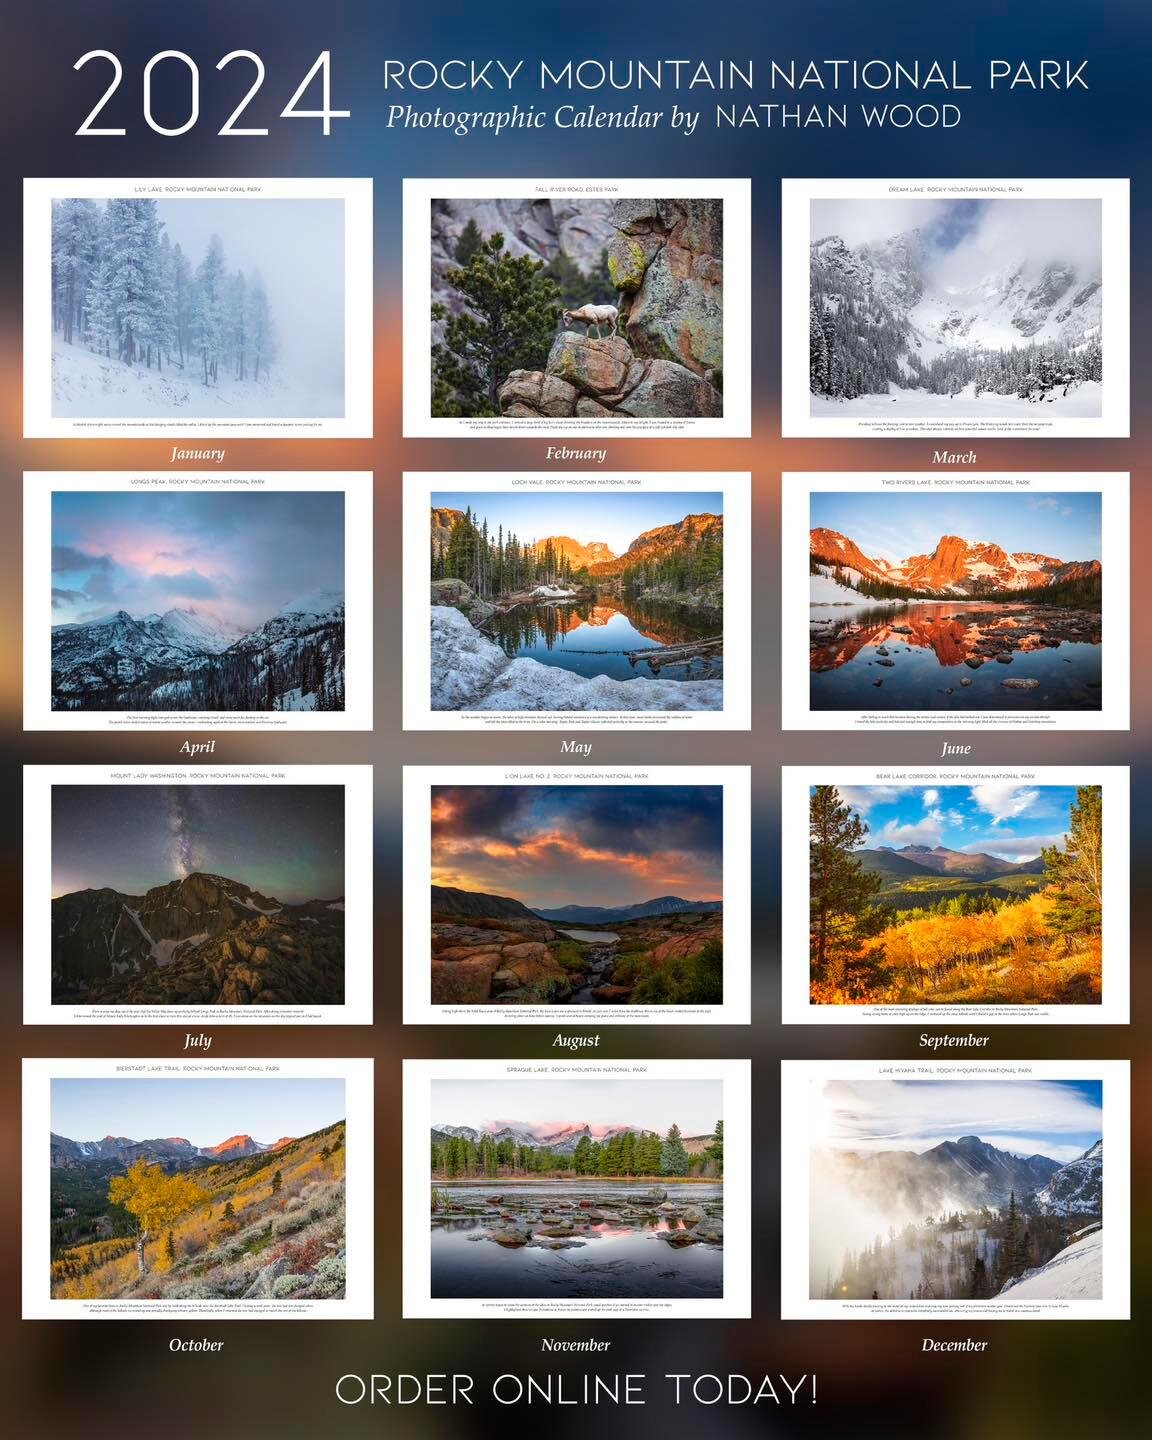 Want to receive your calendar by Christmas?? Order by noon on Friday to ensure Christmas Delivery!

#nationalpark #rockymountainnationalpark #nationalparks #visitrocky #rockymountains #moody_nature #landscapelover #visualsofearth #beautifuldestinatio